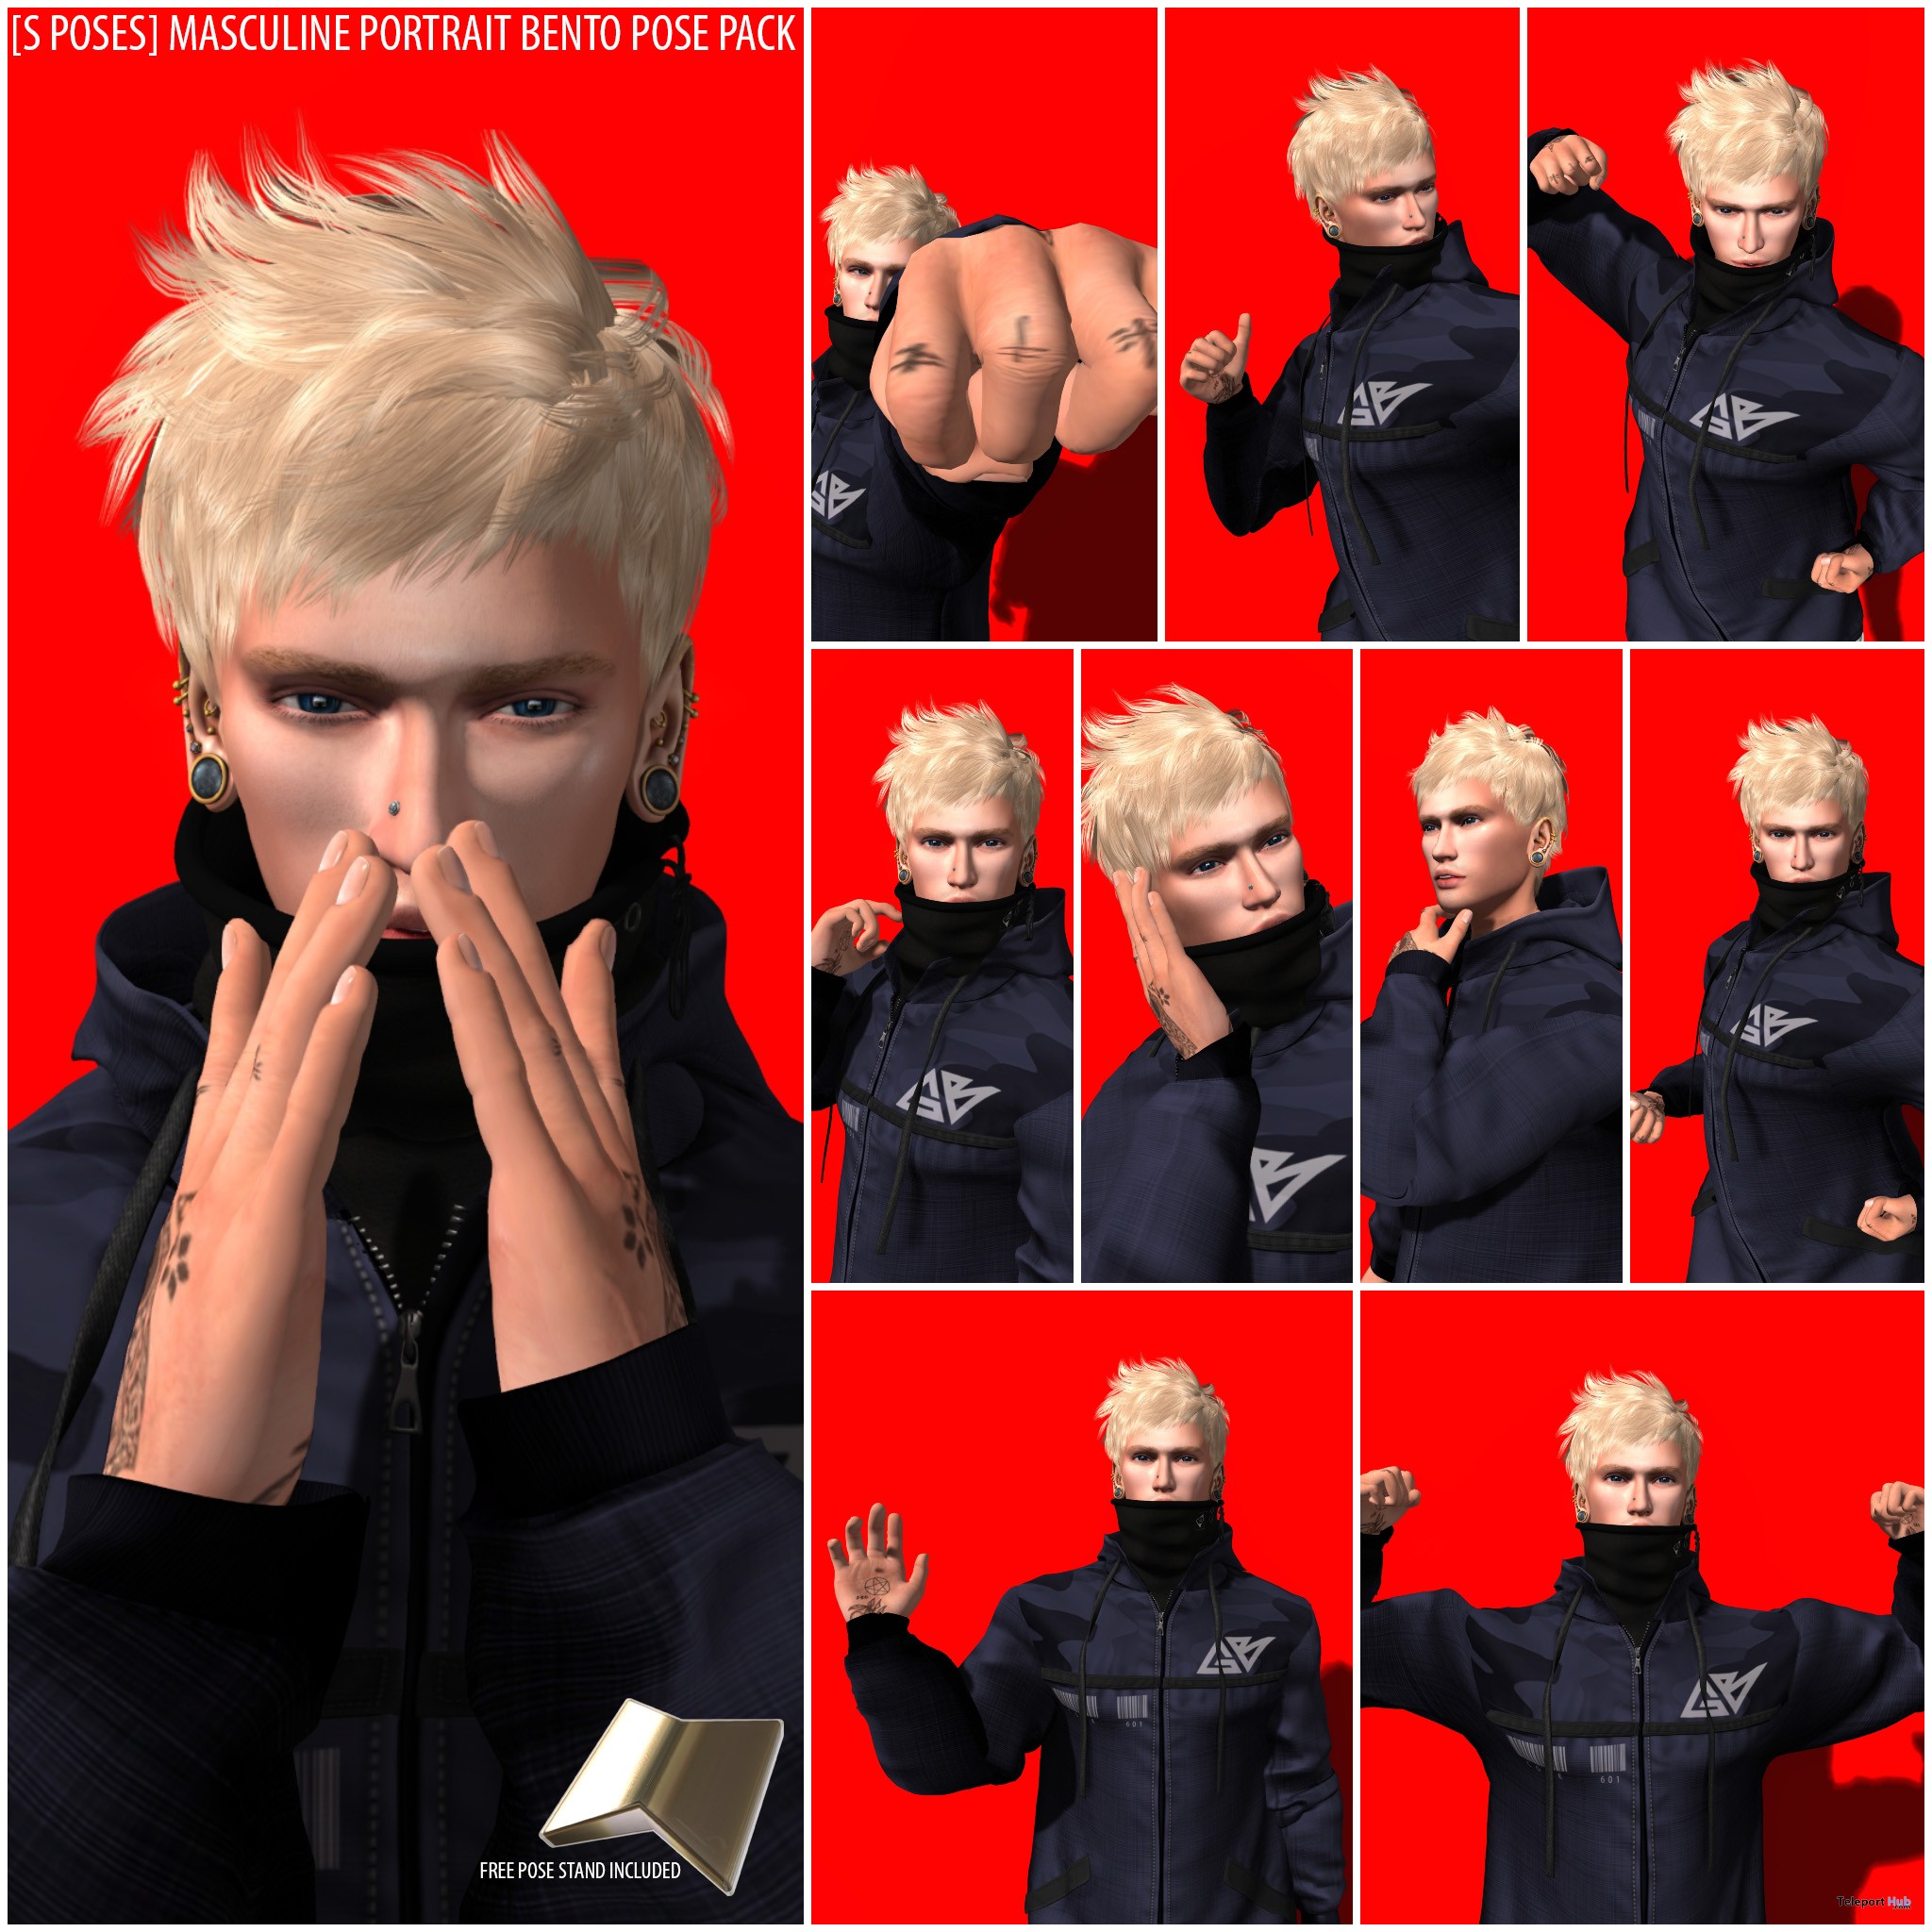 New Release: [S Poses] Masculine Portrait Bento Pose Pack by [satus Inc] - Teleport Hub - teleporthub.com